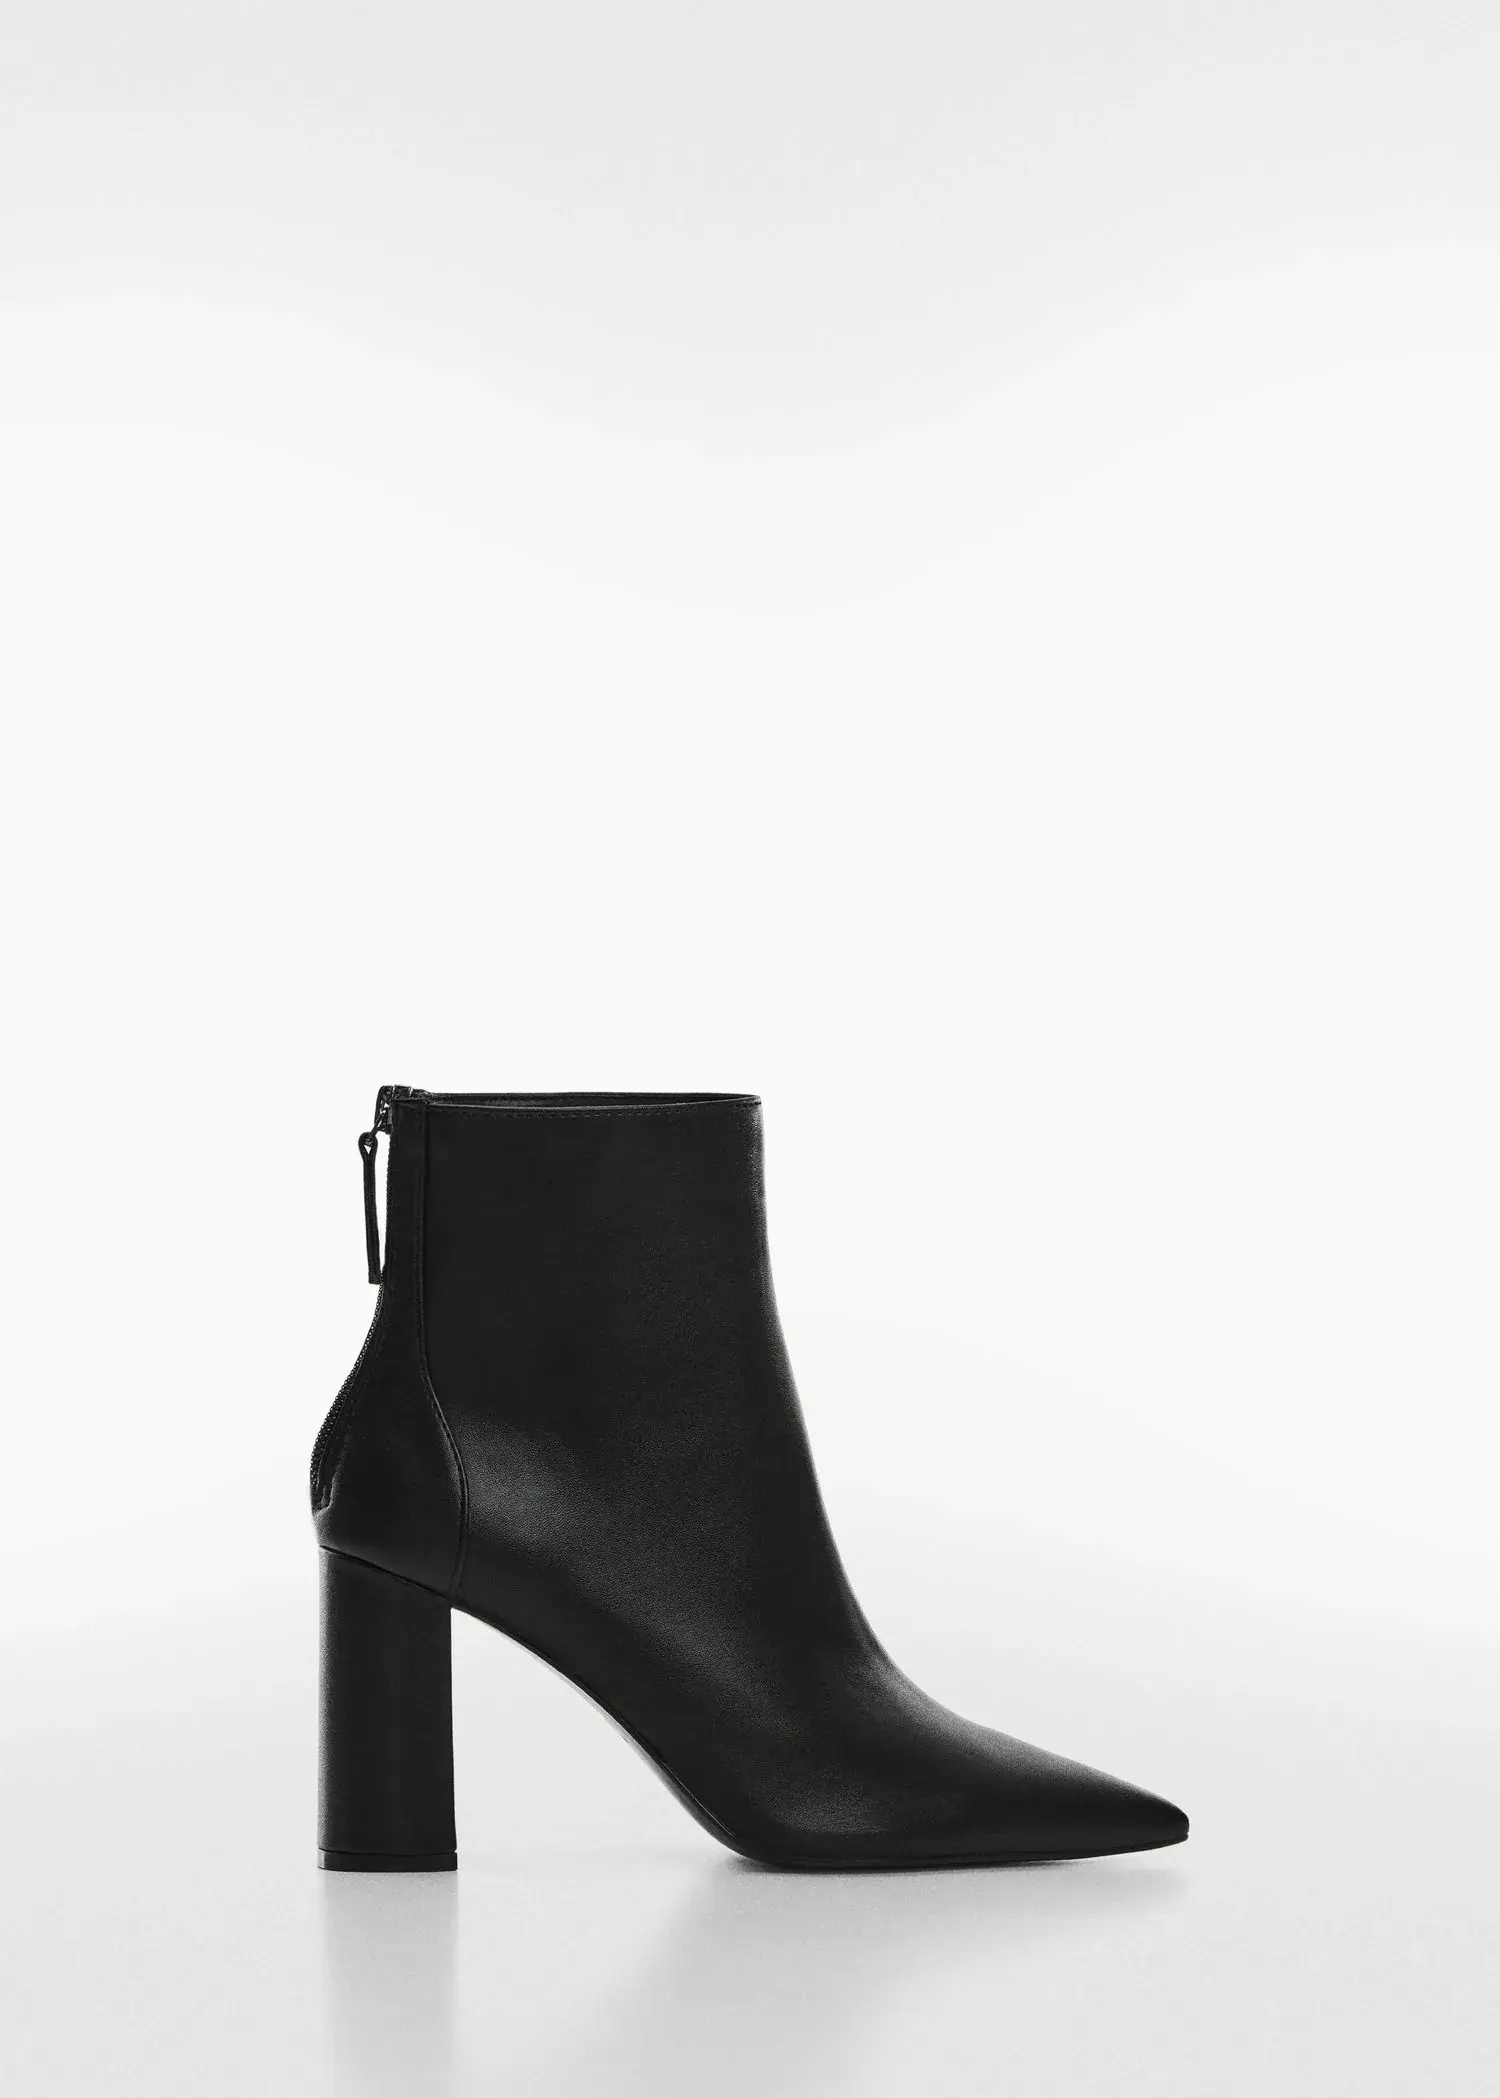 Mango Pointed-toe ankle boot swith zip closure. 1